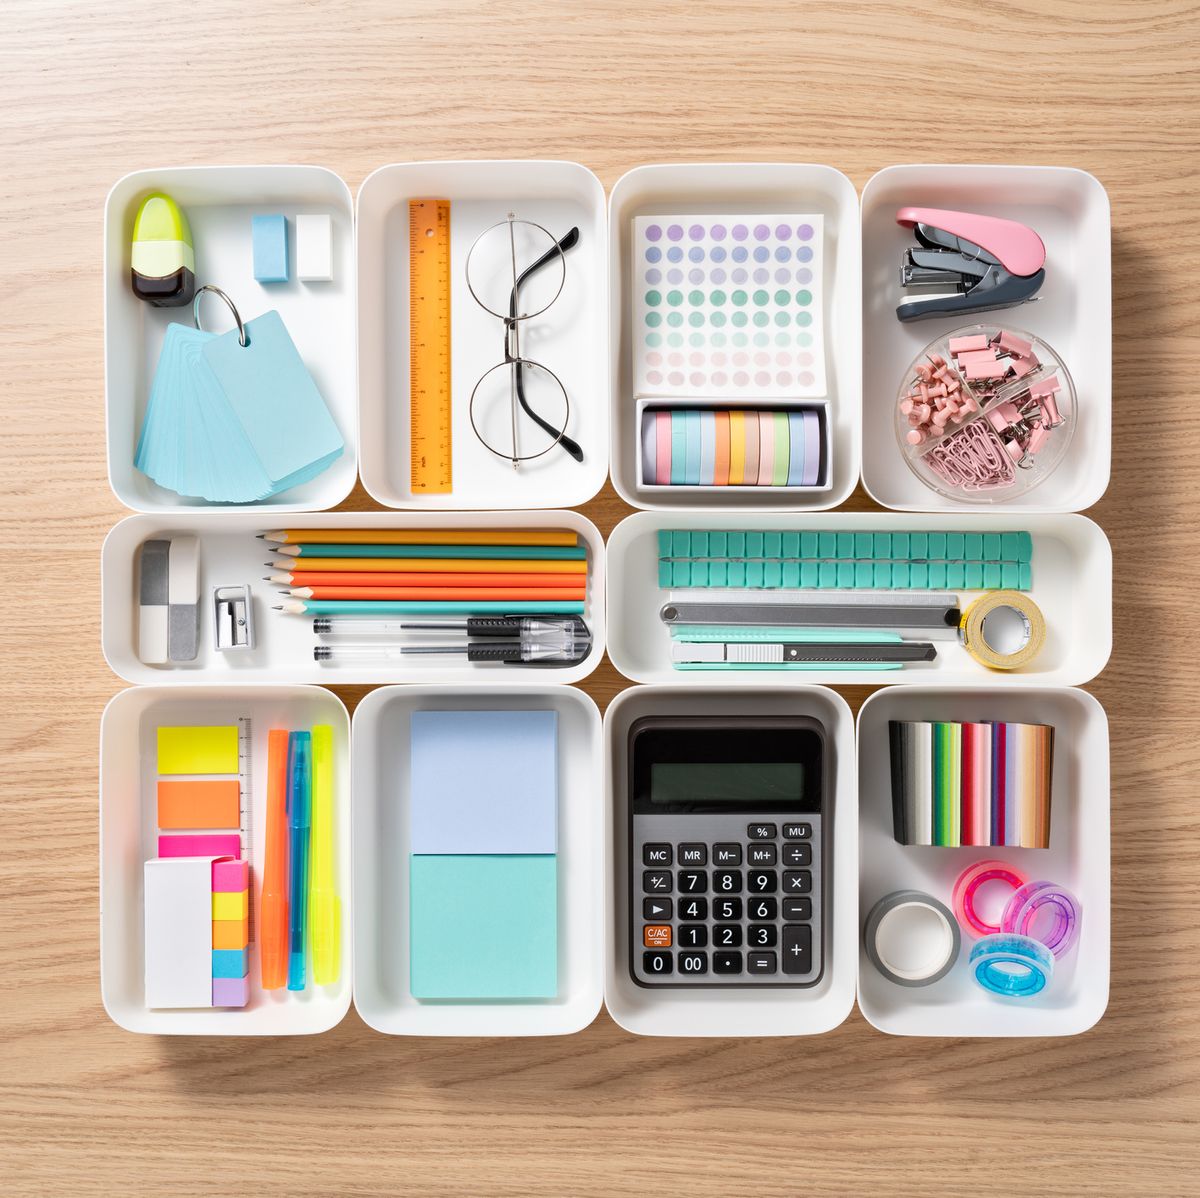 Psychology of Organizing: Why Are We So Obsessed With Organizing?